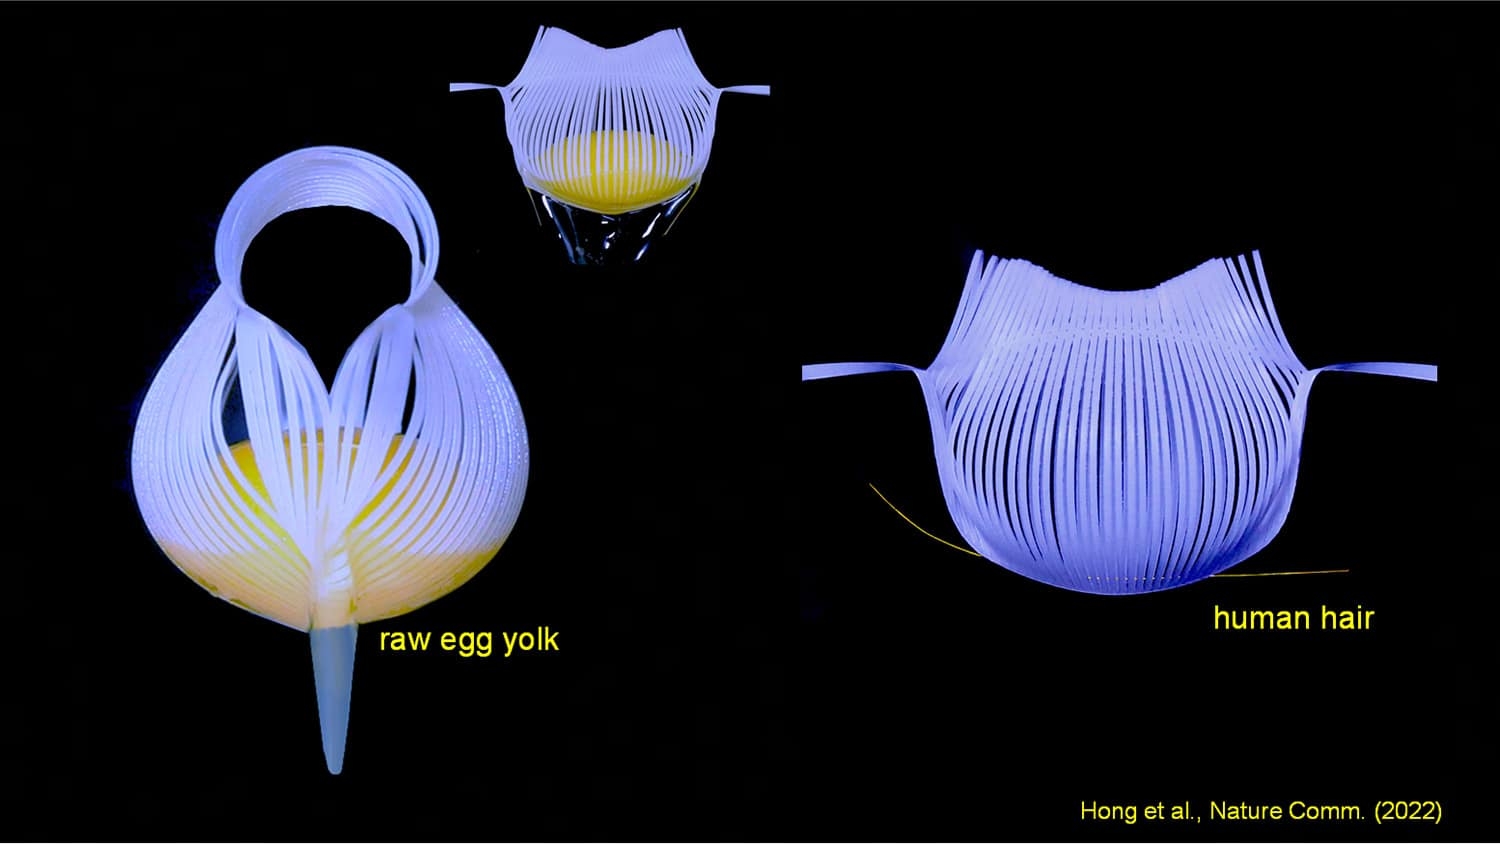 three separate images show a gripping device holding an egg yolk